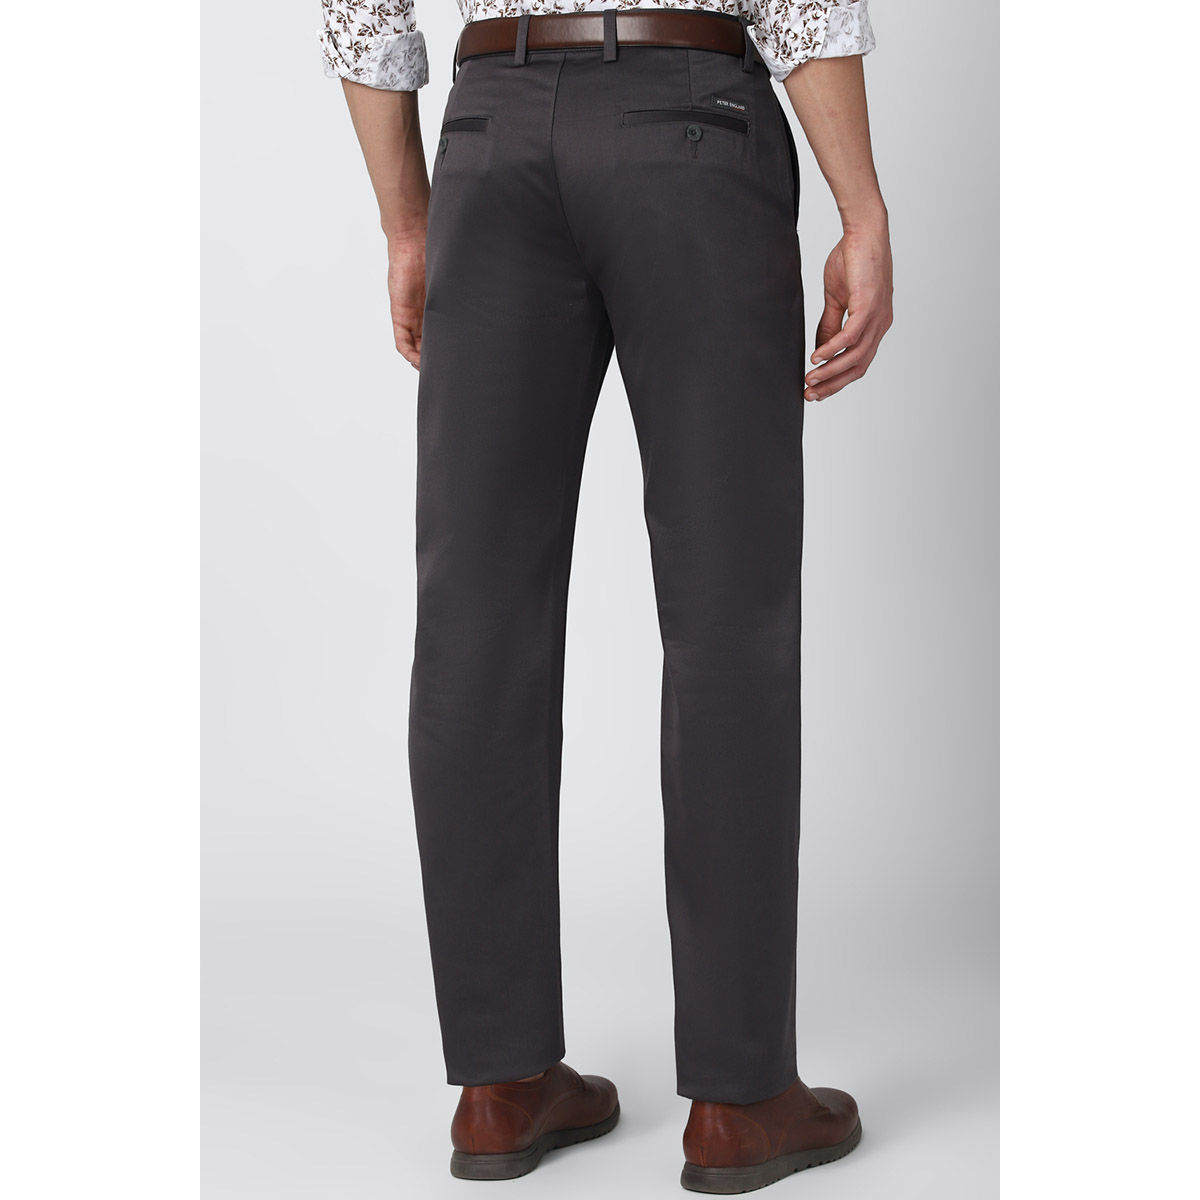 Peter England Casual Trousers  Buy Peter England Men Beige Solid Super  Slim Fit Casual Trousers Online  Nykaa Fashion